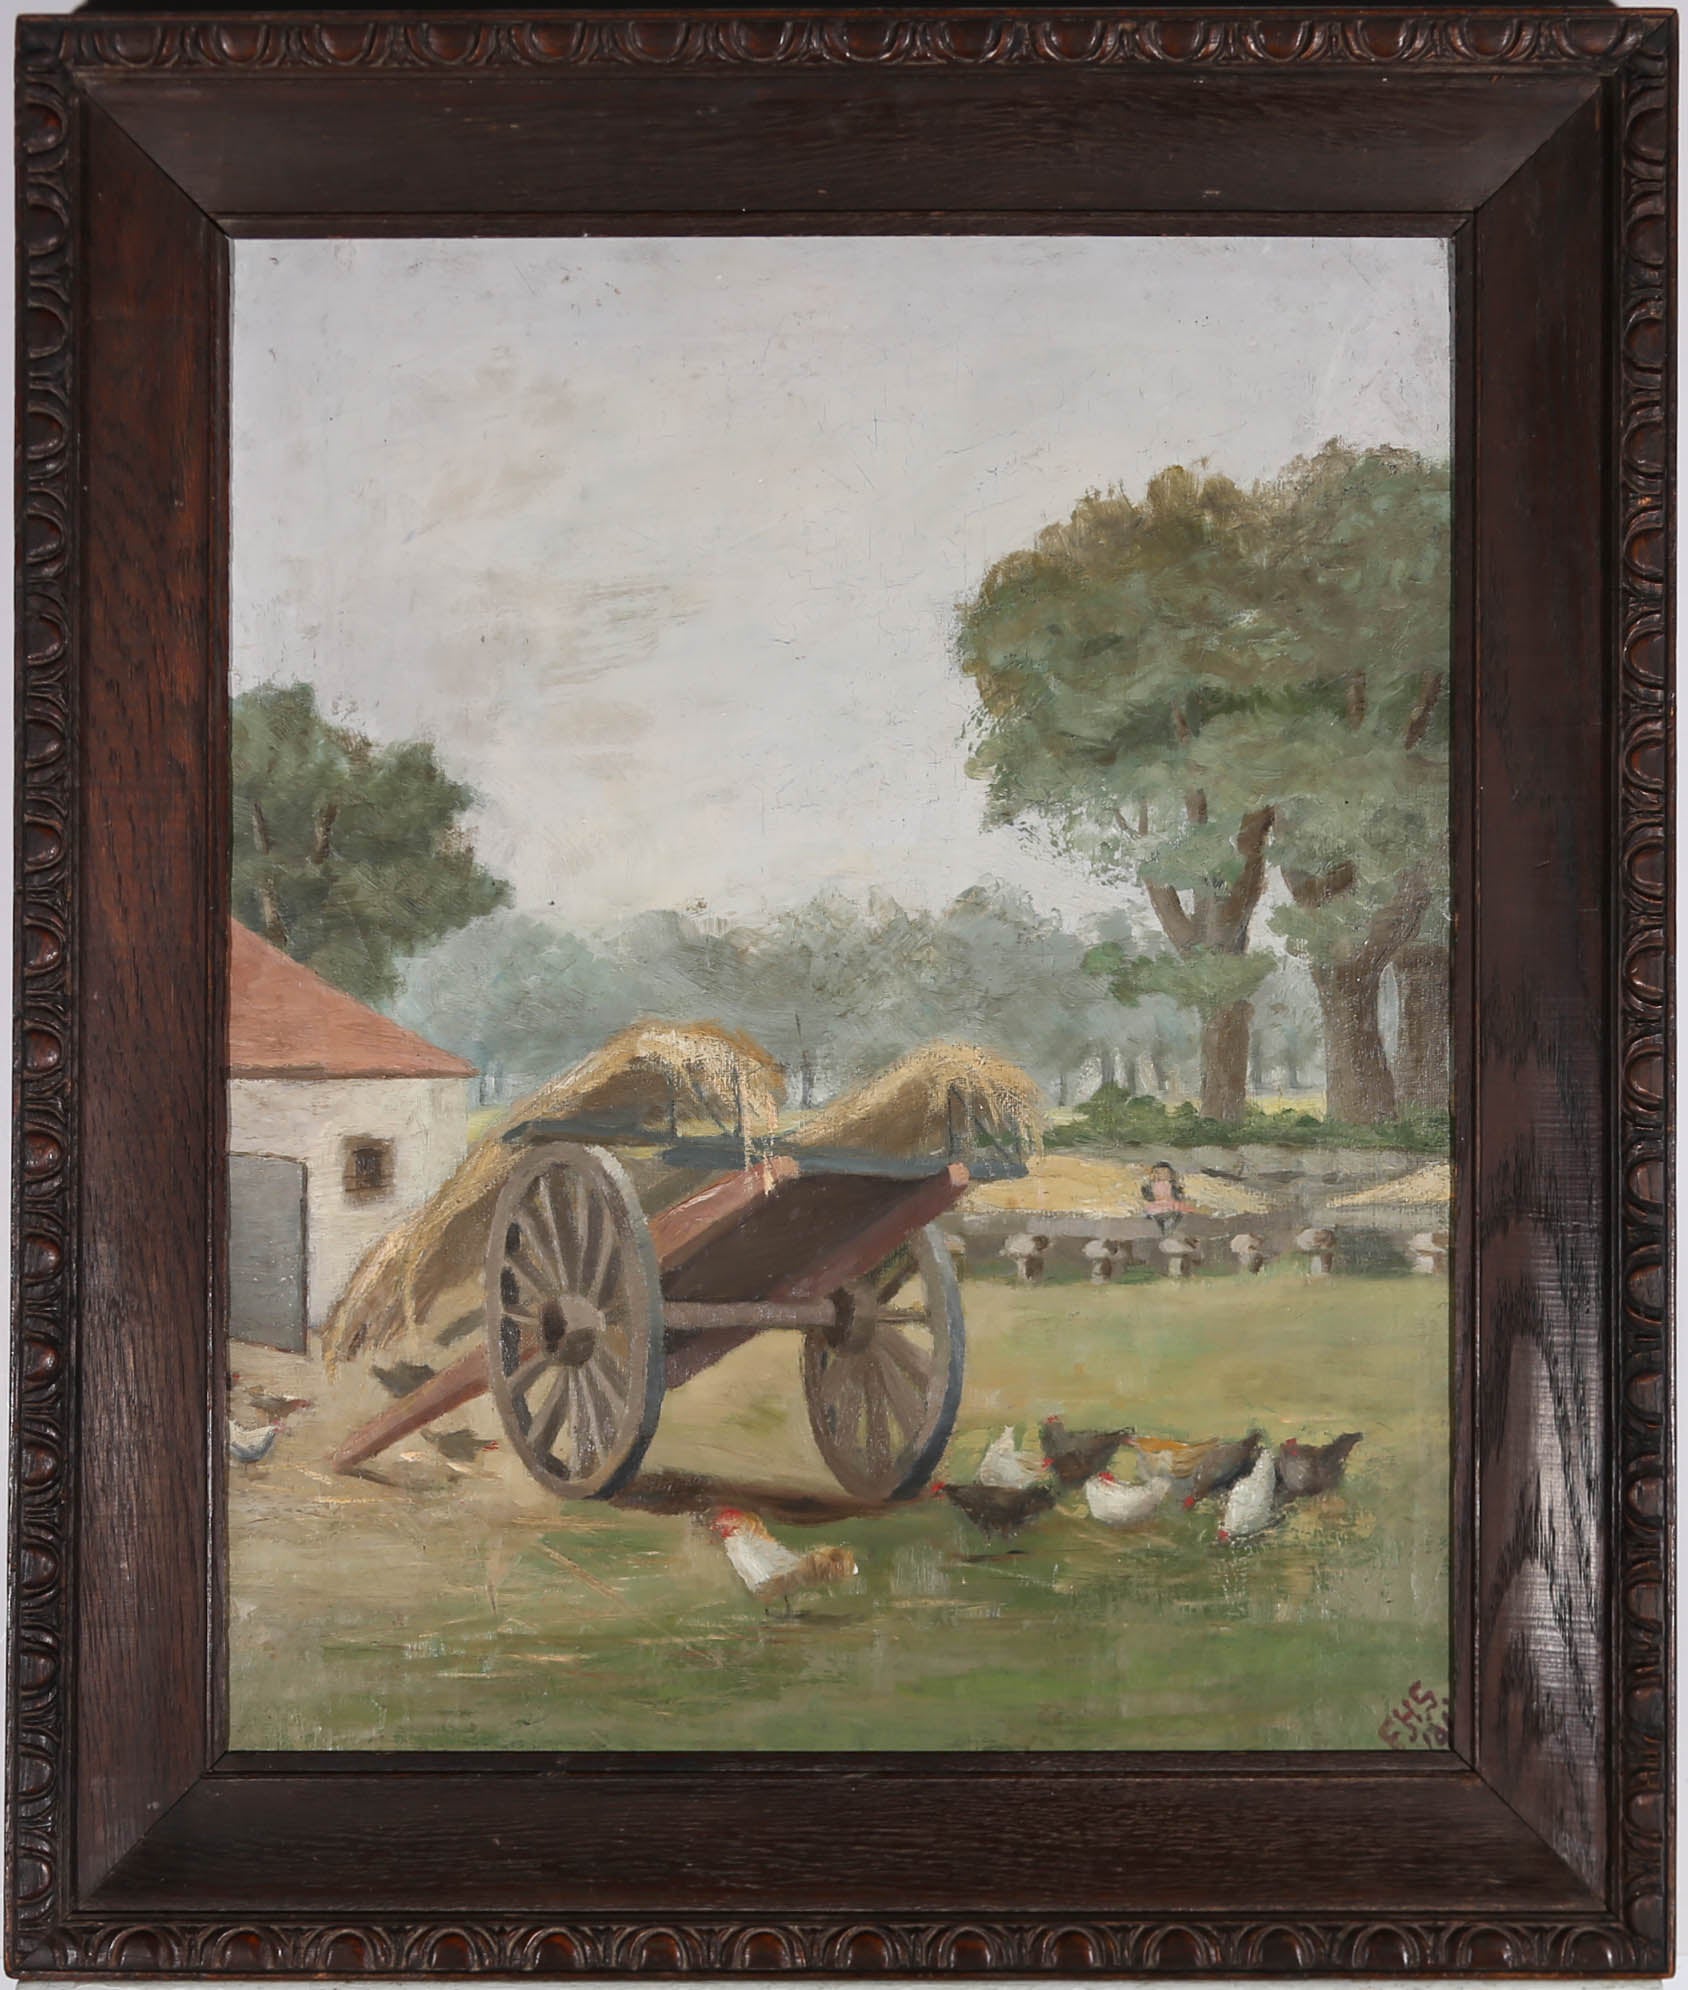 E.H.S. Landscape Painting - E.H.S - Framed 1896 Oil, Hay Cart in the Farmyard